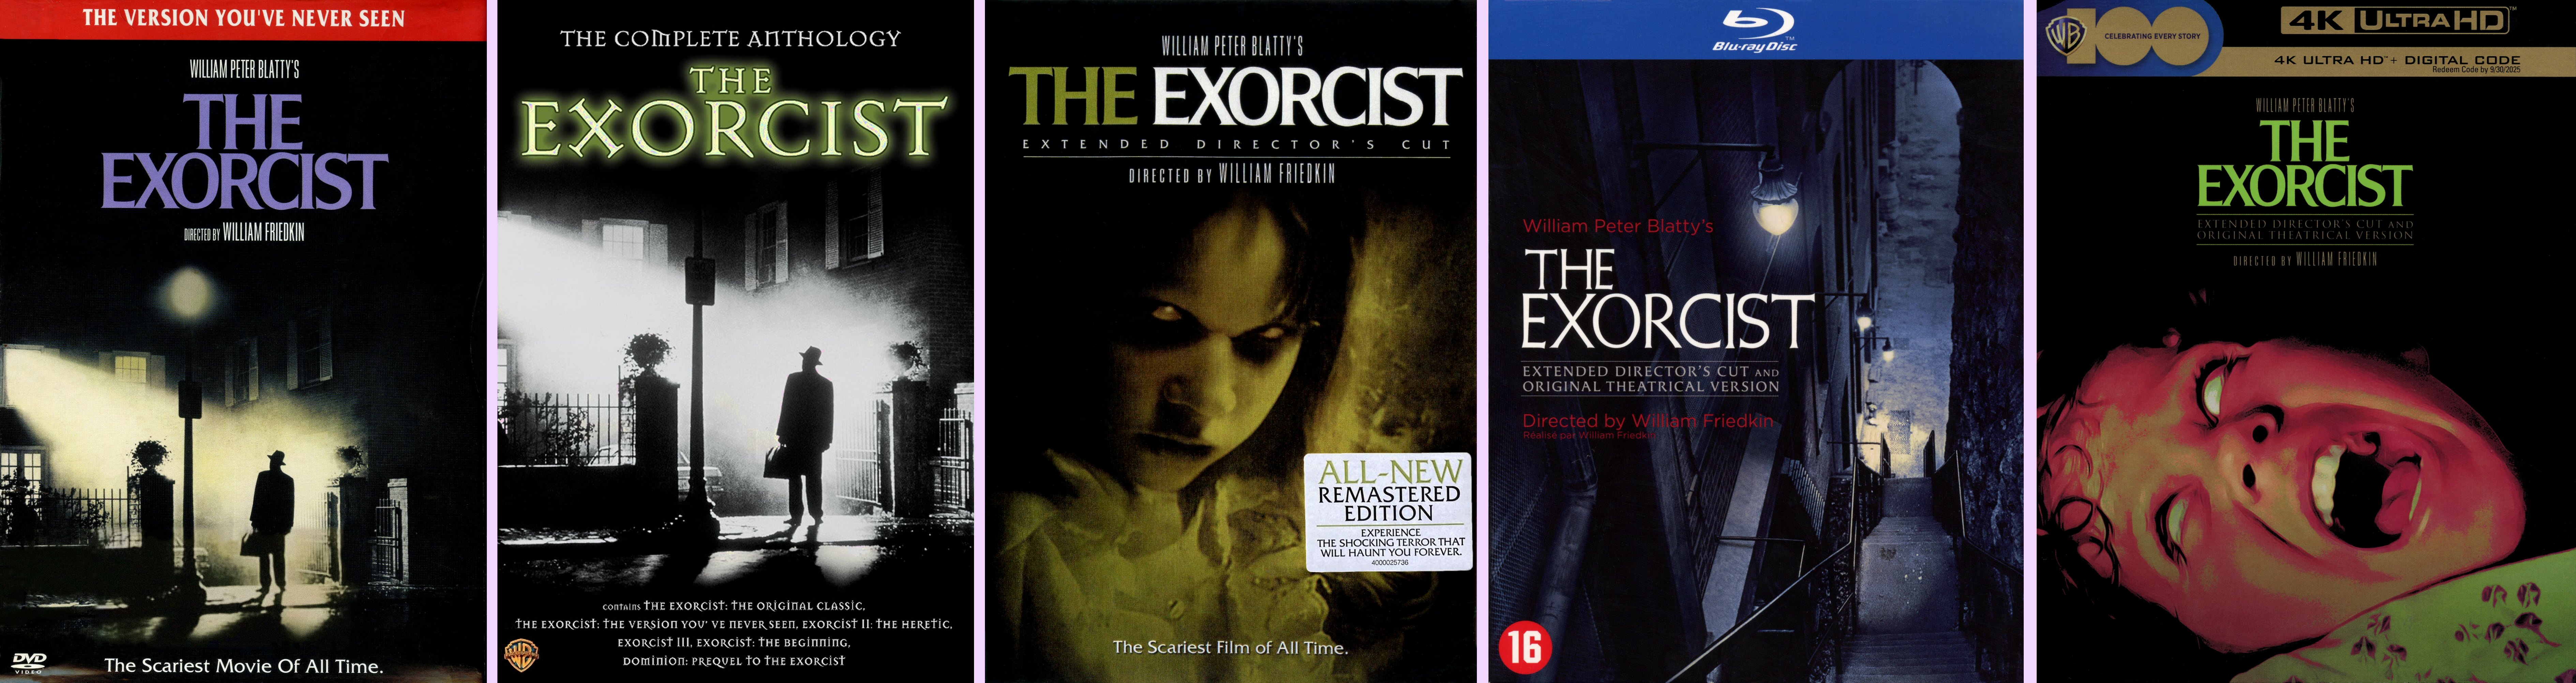 DVD Exotica: Controversial UHDs: The Exorcist